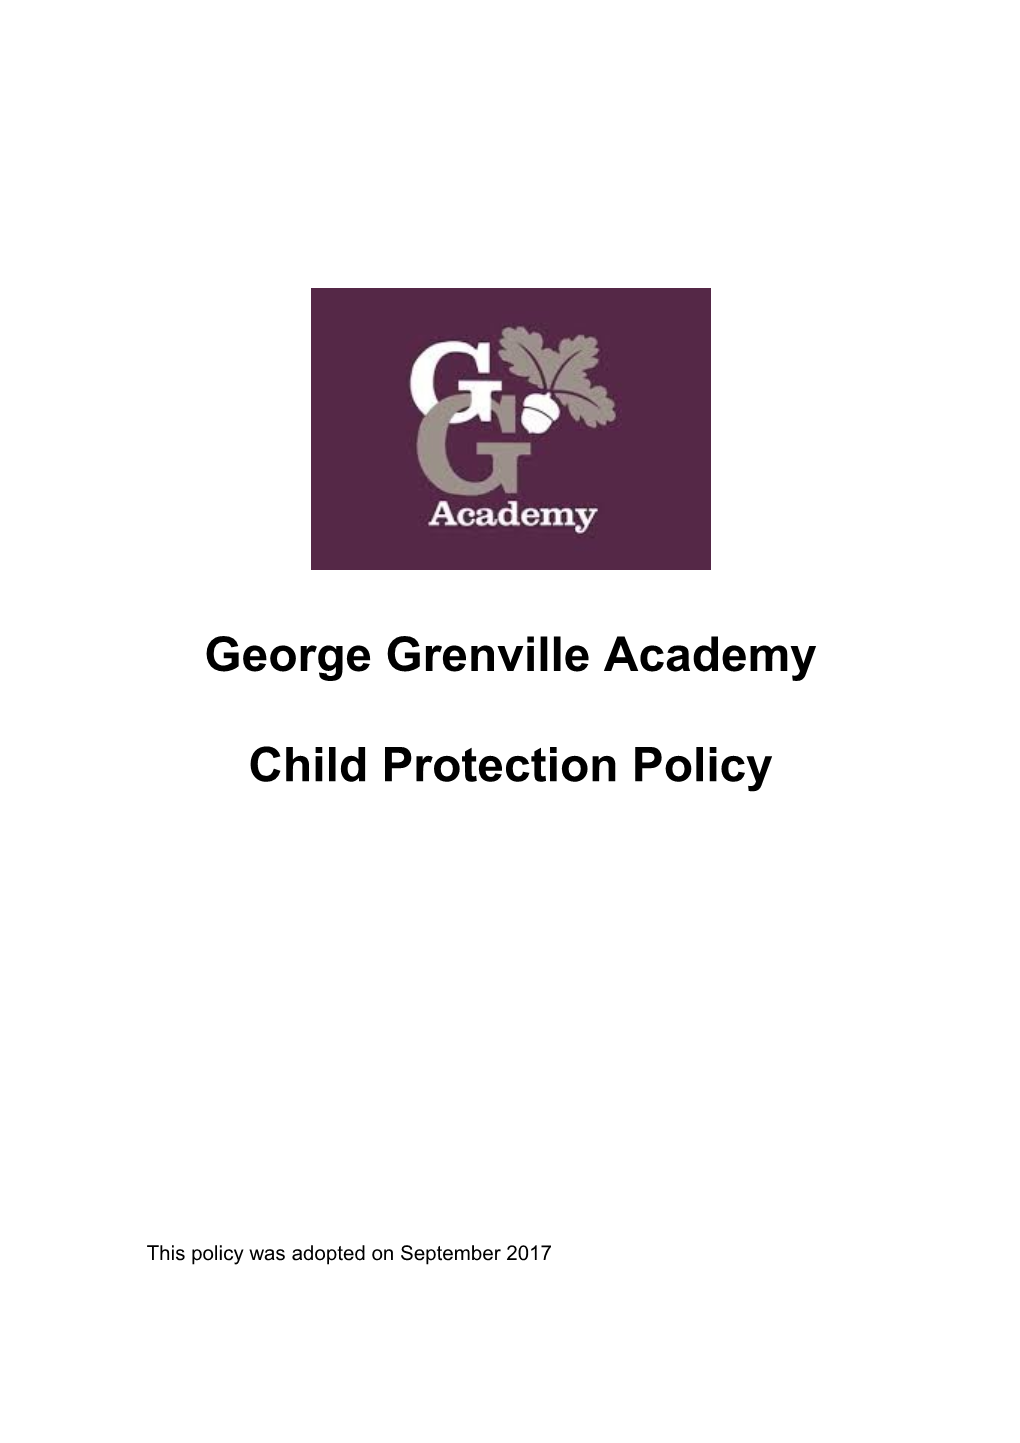 George Grenville Academy